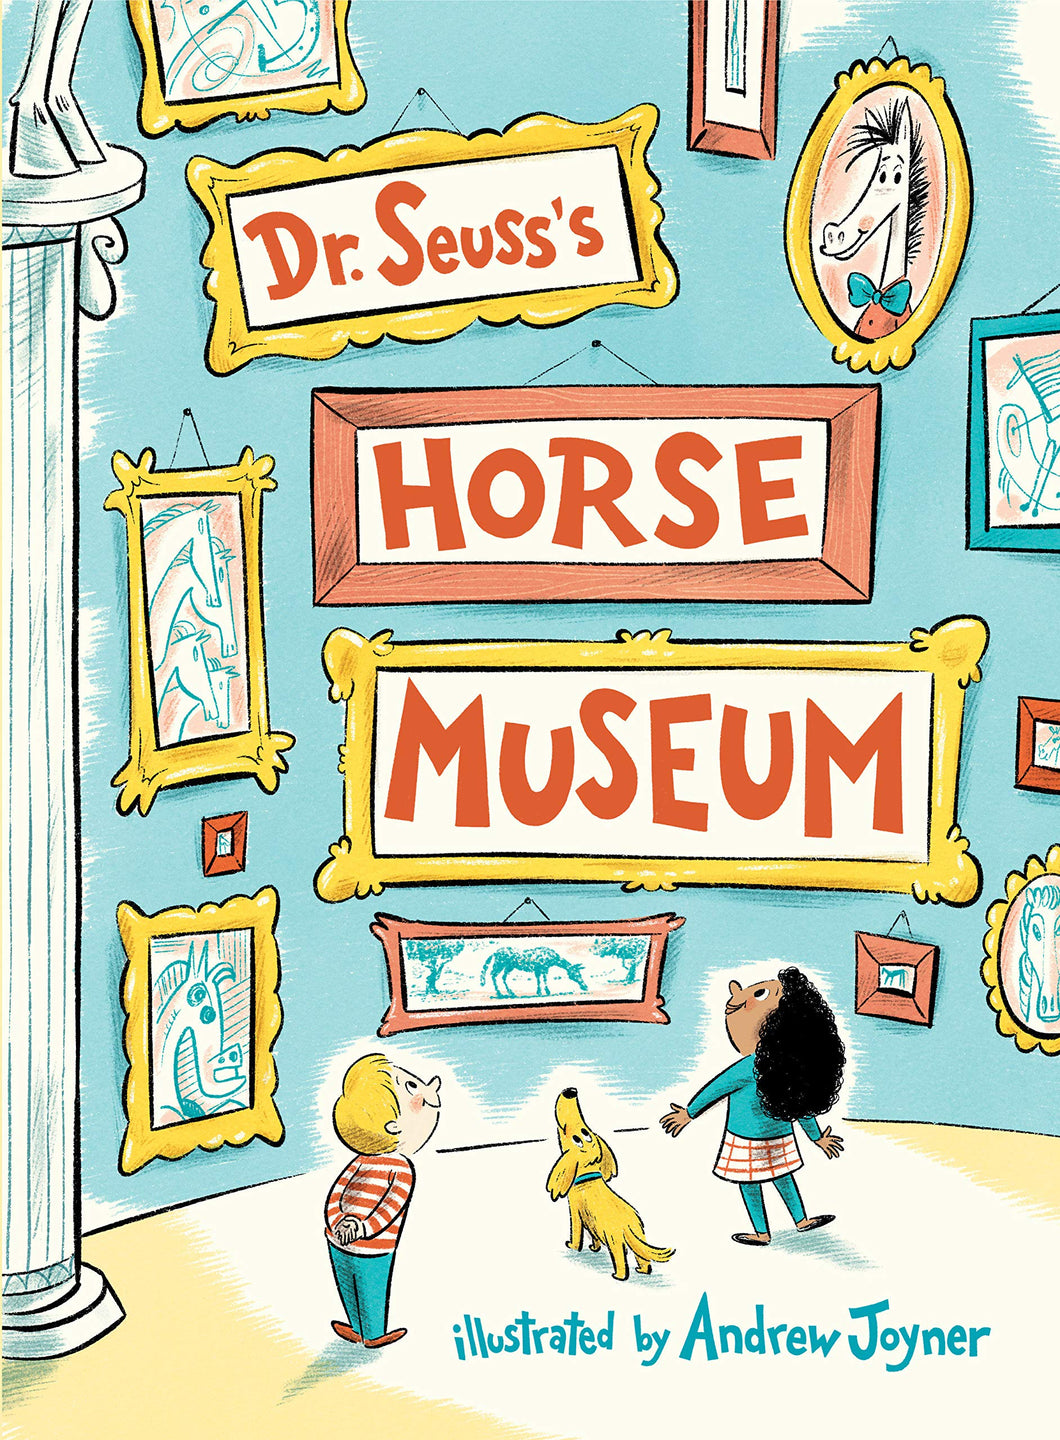 The Horse Museum